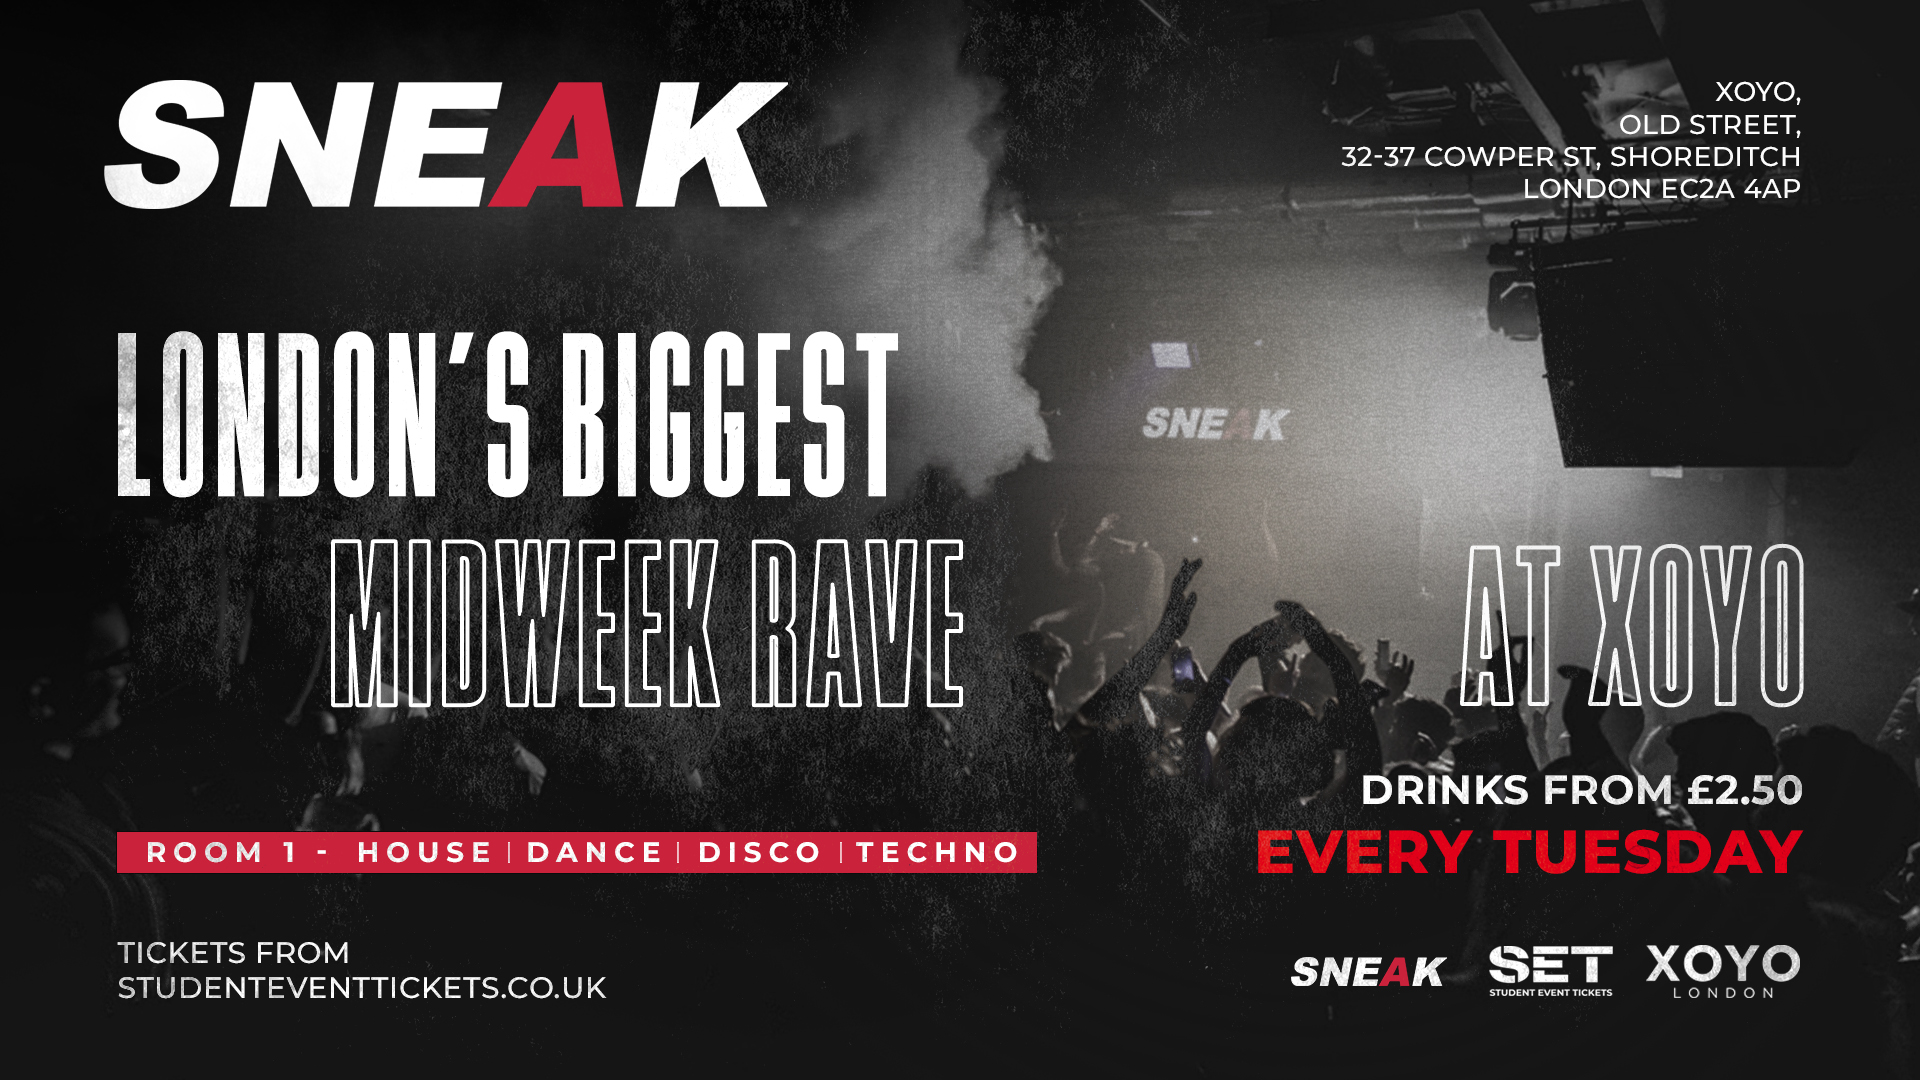 Join us every Tuesday for London's biggest mid-week rave!